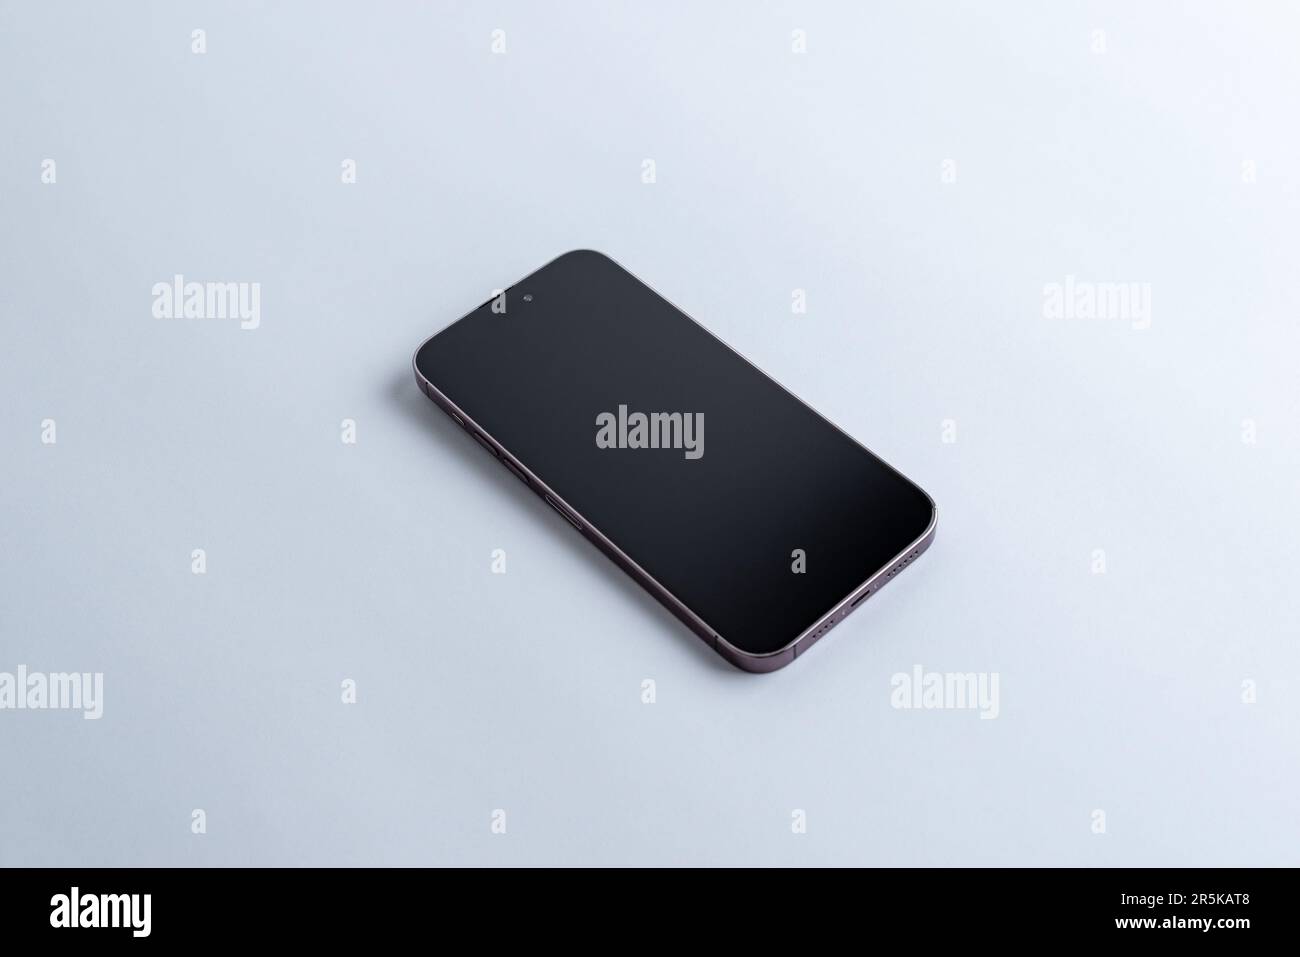 Clean and modern phone on gray desk. Isometric view for app showcase a sleek and professional aesthetic Stock Photo